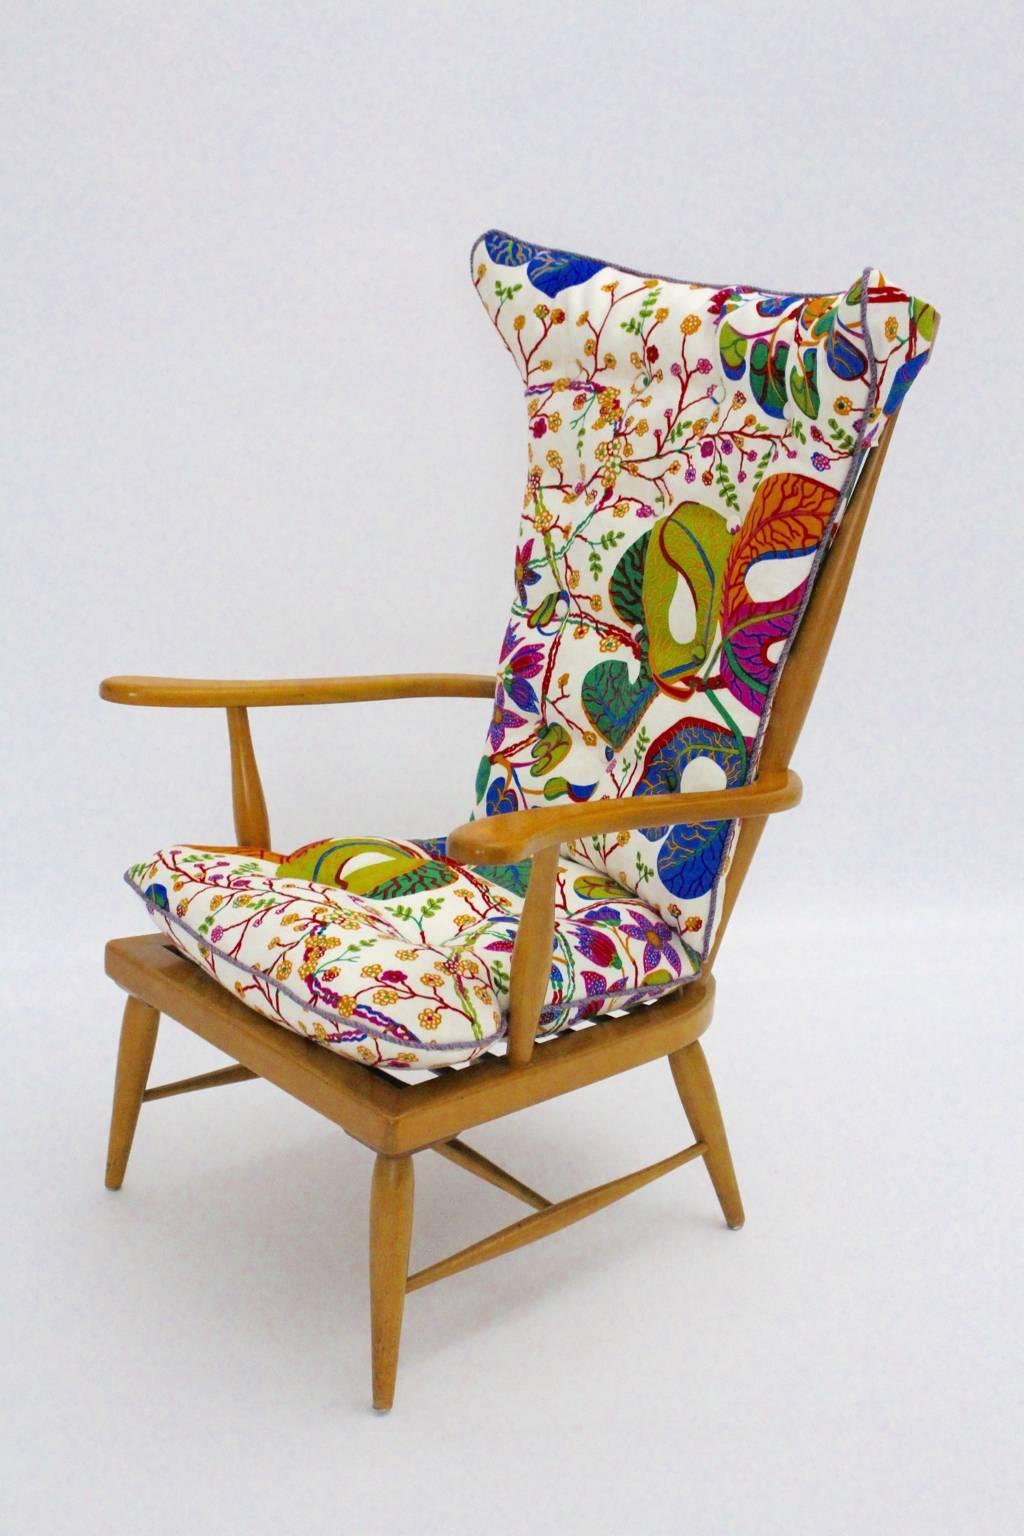 Art deco vintage armchair or Windsor chair from beech designed by Anna Lülja Praun circa 1952.
The beech stained similar to cherry in a honey brown wooden tone and hand polished.
Beautiful loose cushions covered with Josef Frank Design textile